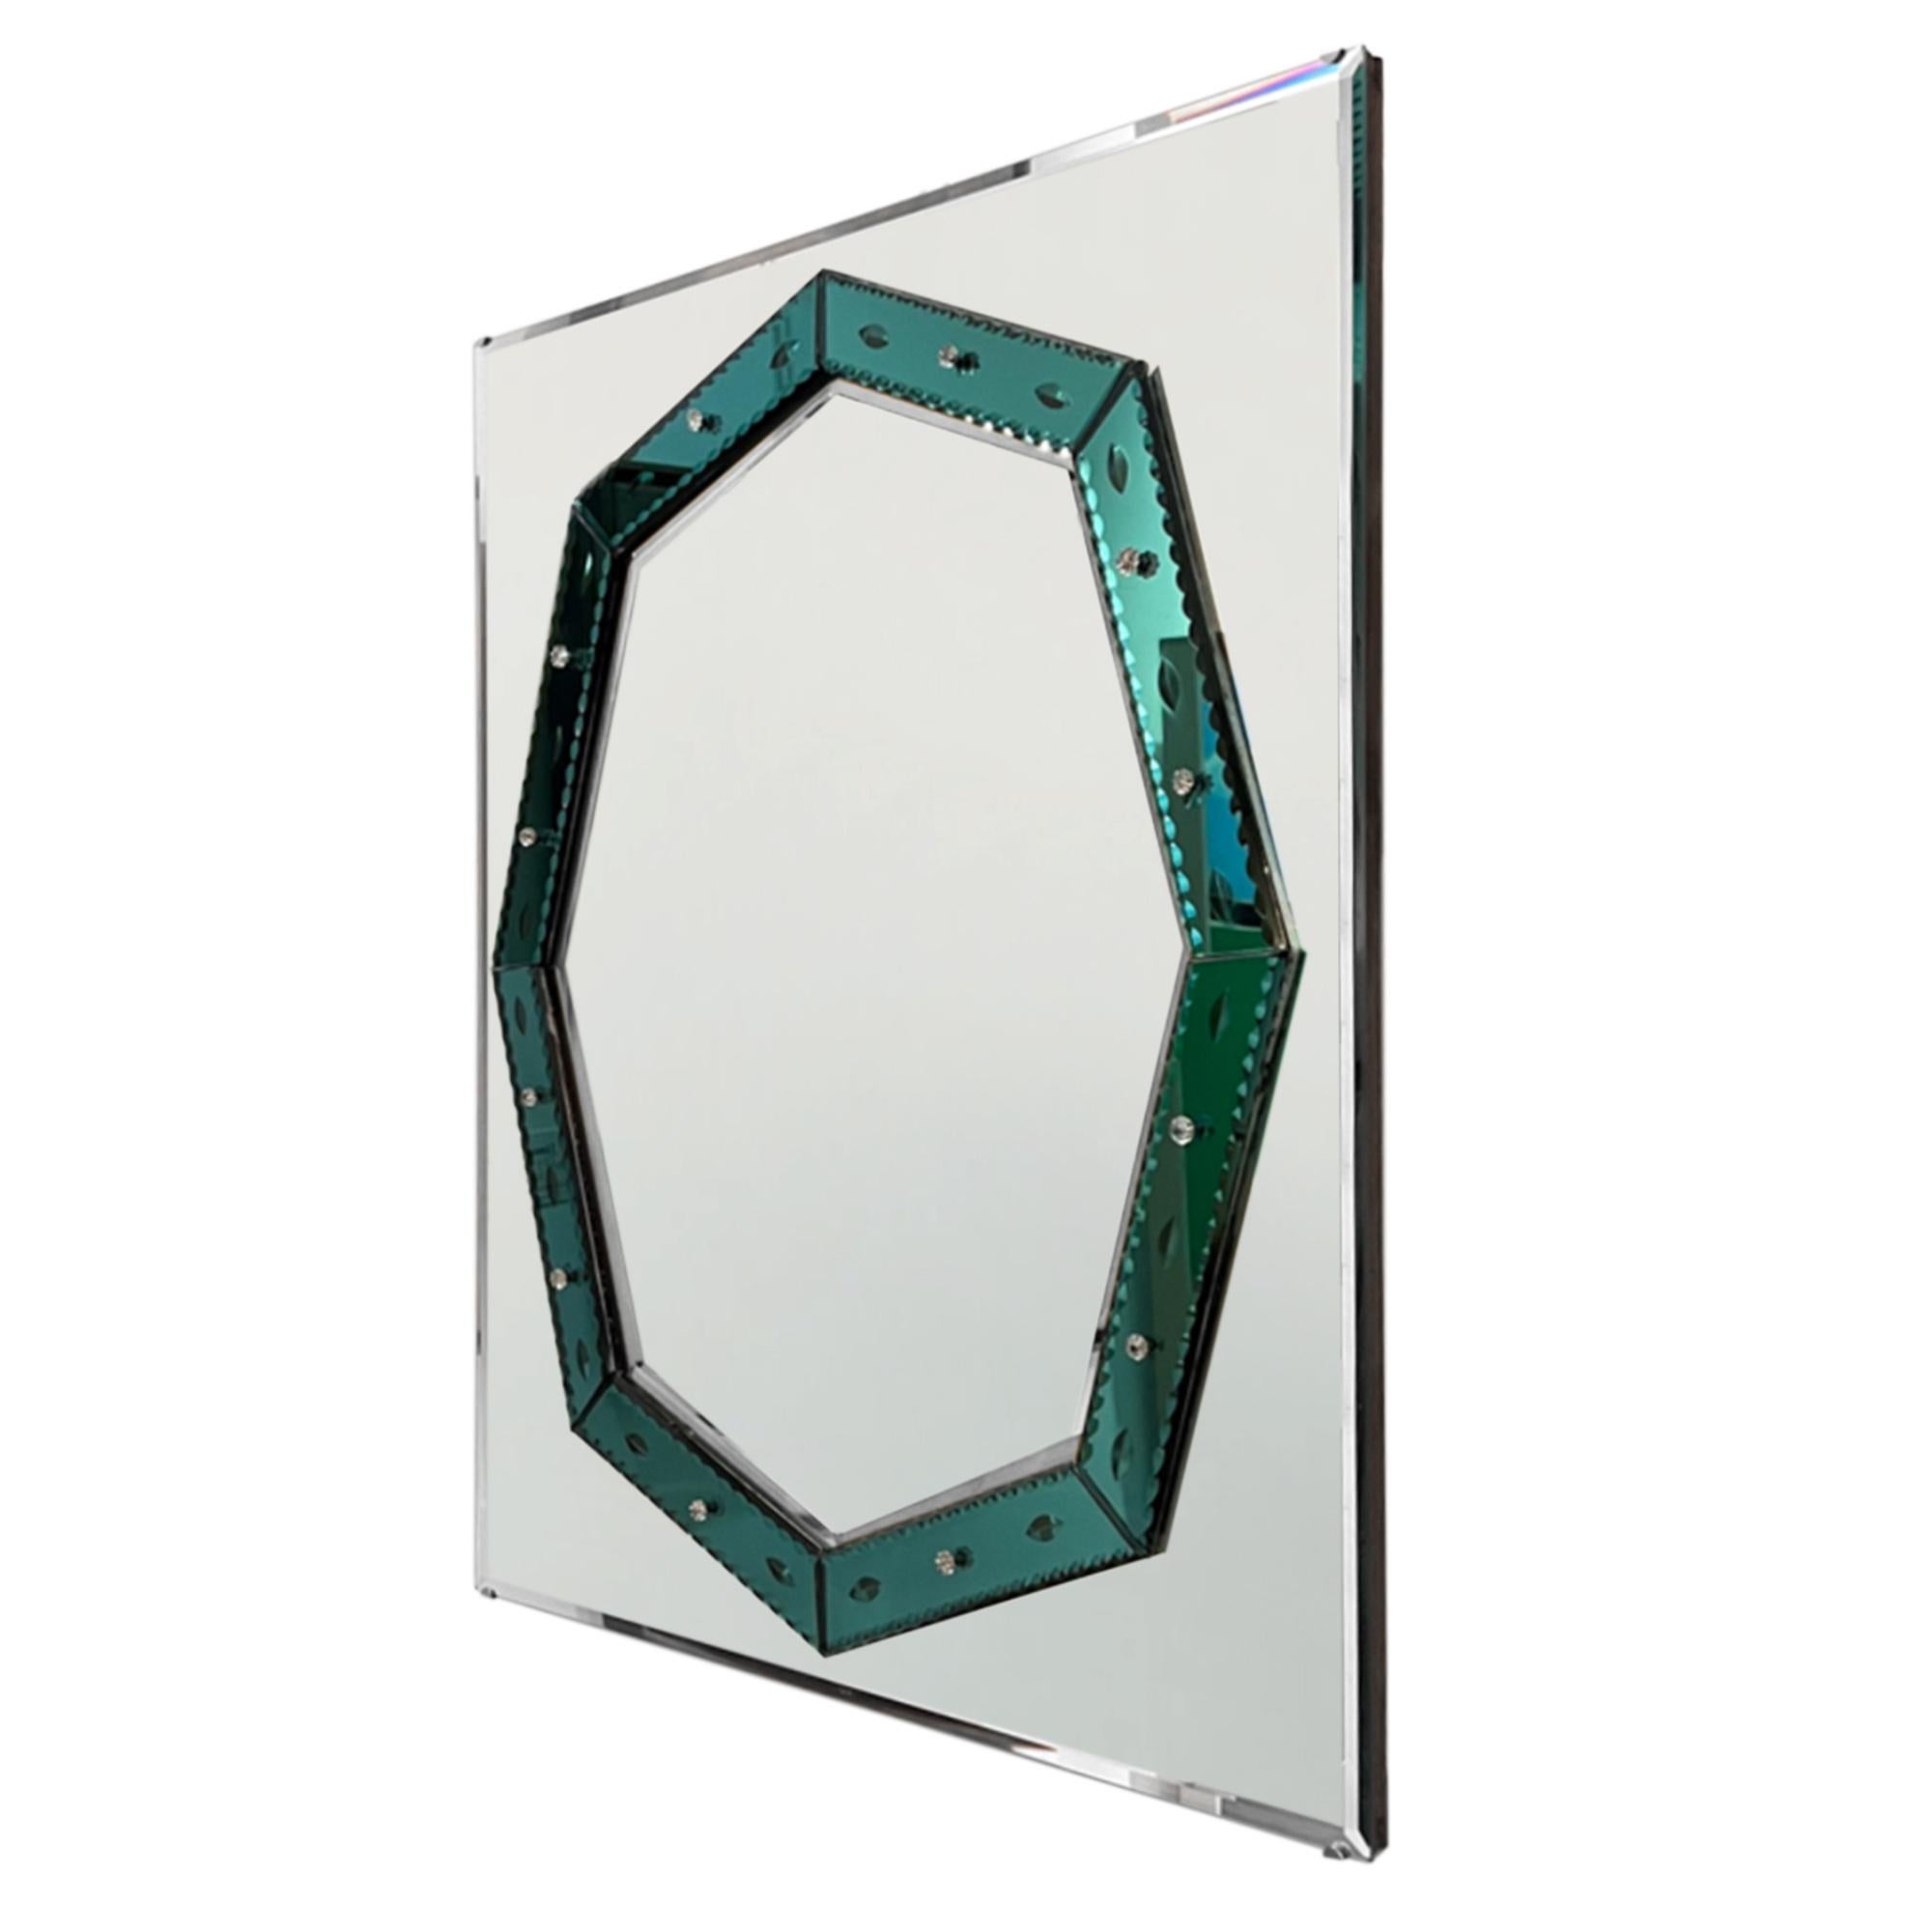 This is a lovely wall mirror, suitable for any room with great Art Deco green detail.

The edge of the mirror has is bevelled and the green decoration is secured with clear glass flower pins. The width of the glass is 5cm and it's an attractive mid